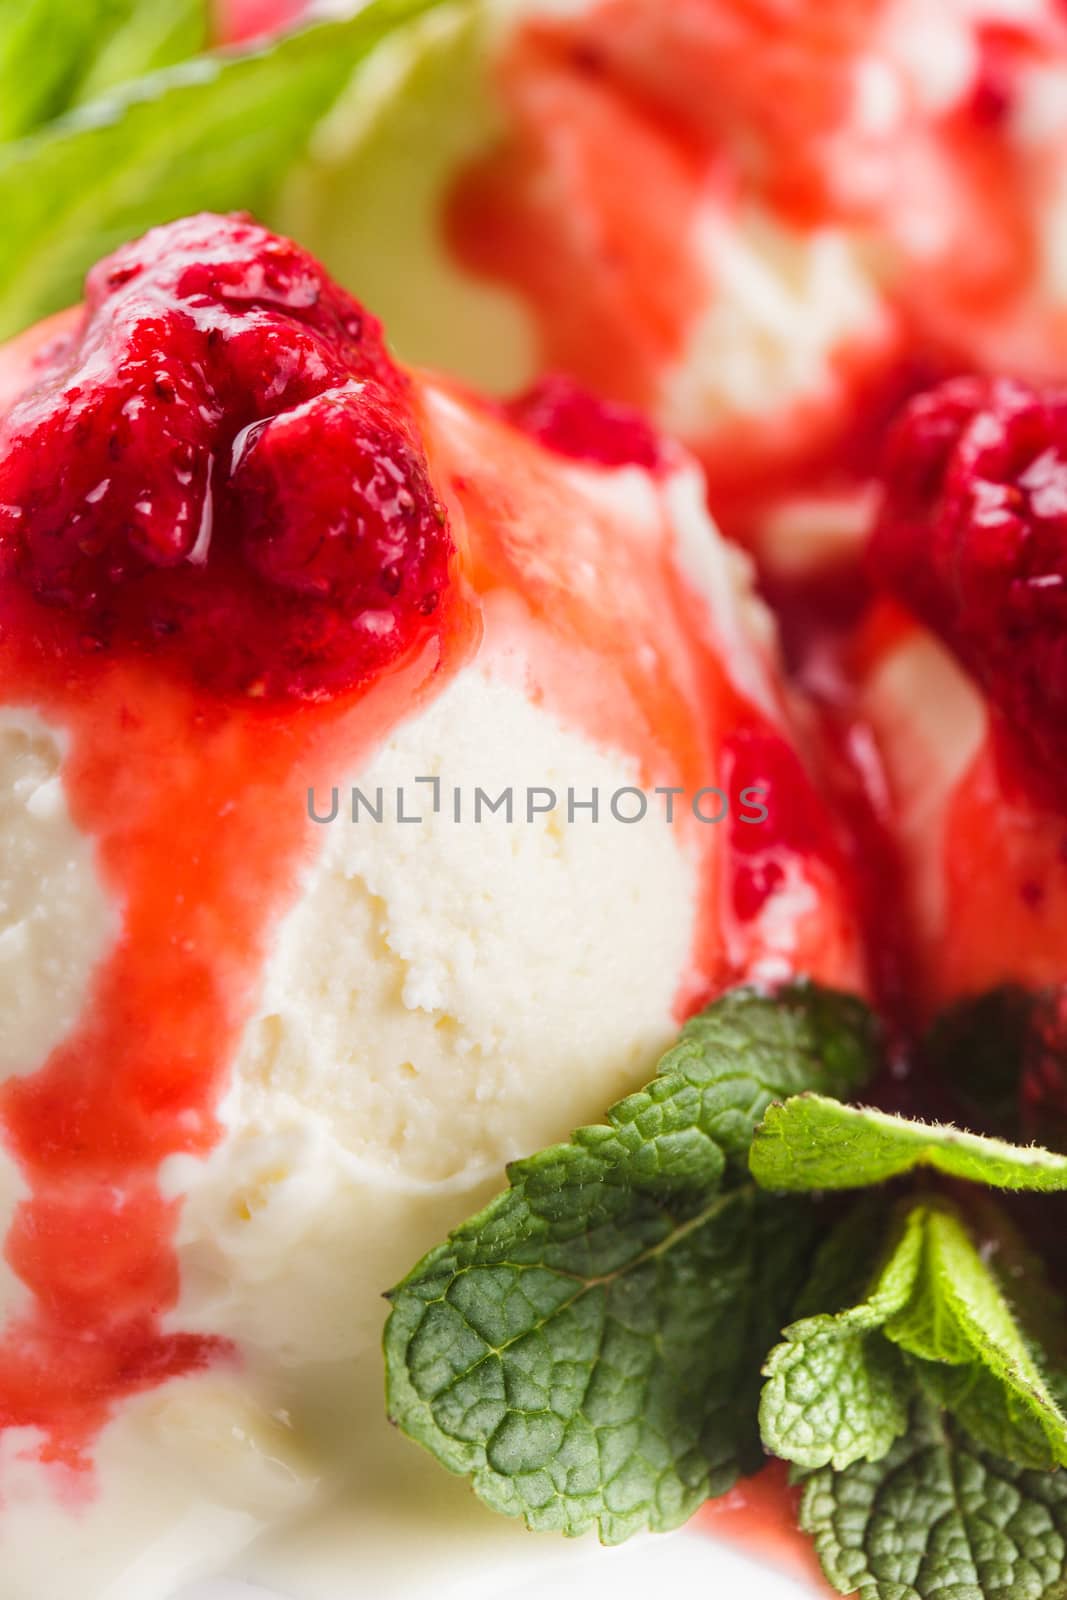 Vanilla ice cream with strawberry jam and mint leaves